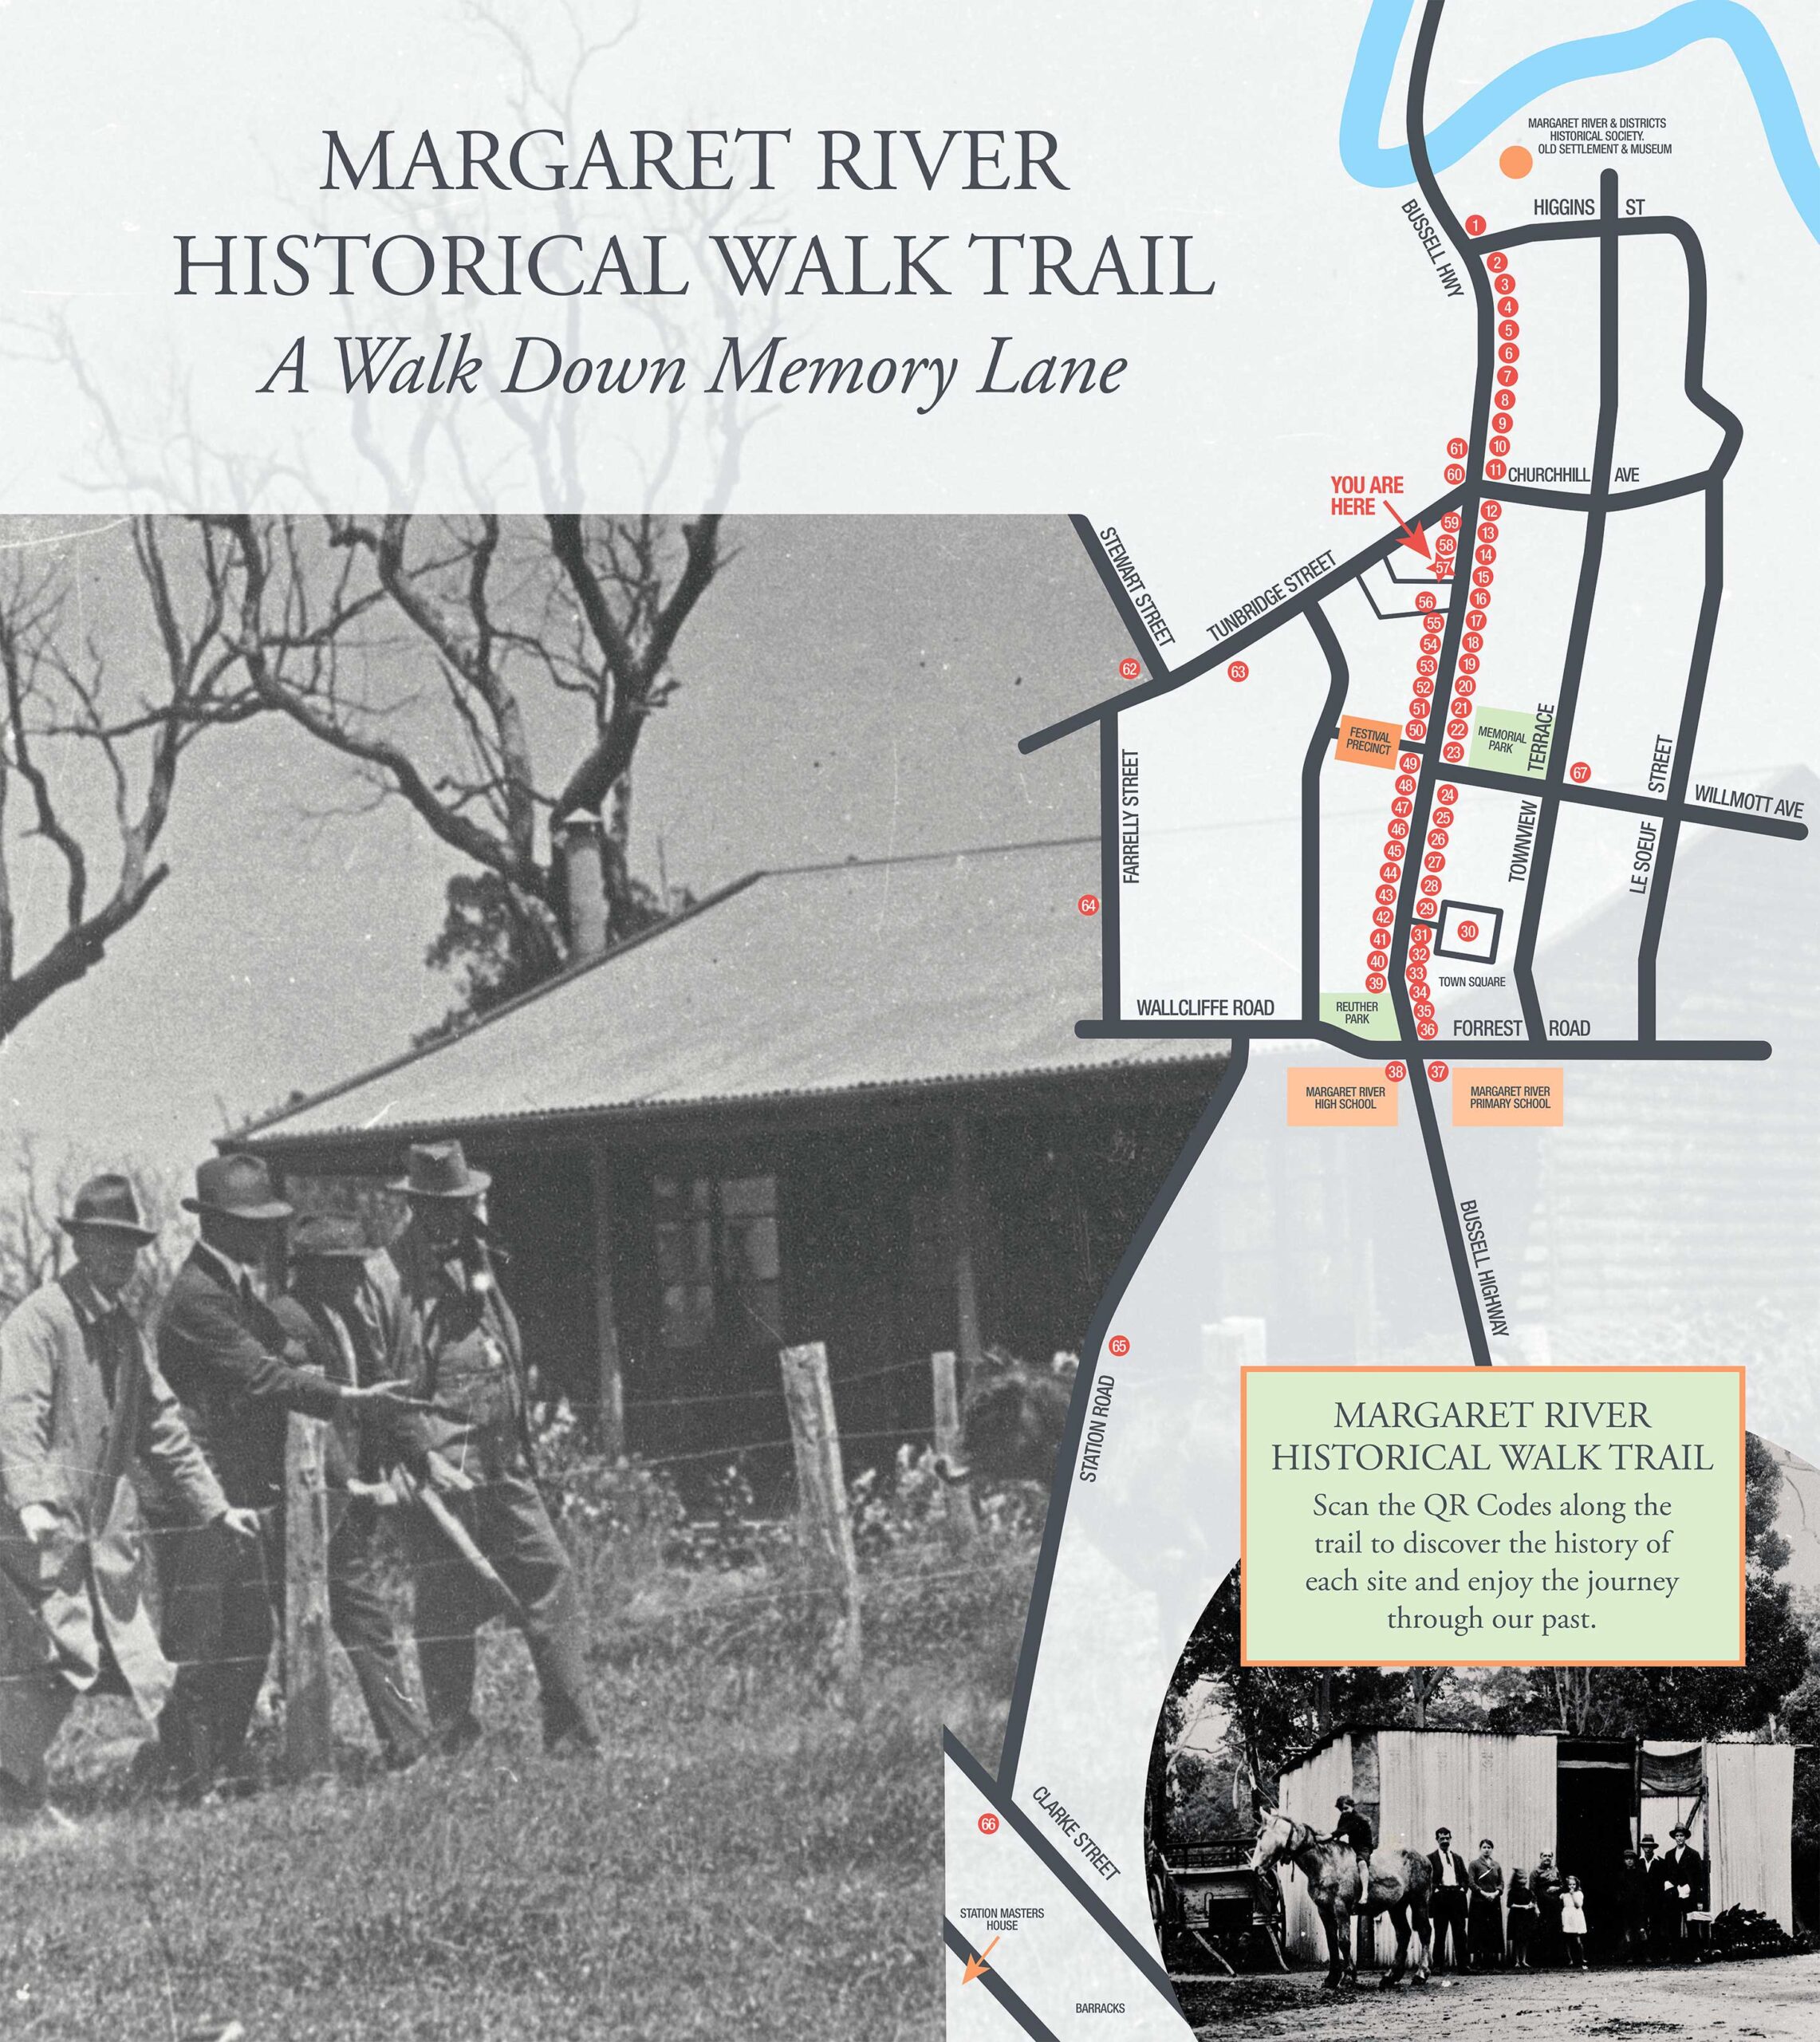 Margaret River Historical Walk. Scan the QR codes along the trail in the main street to discover the history of each site.